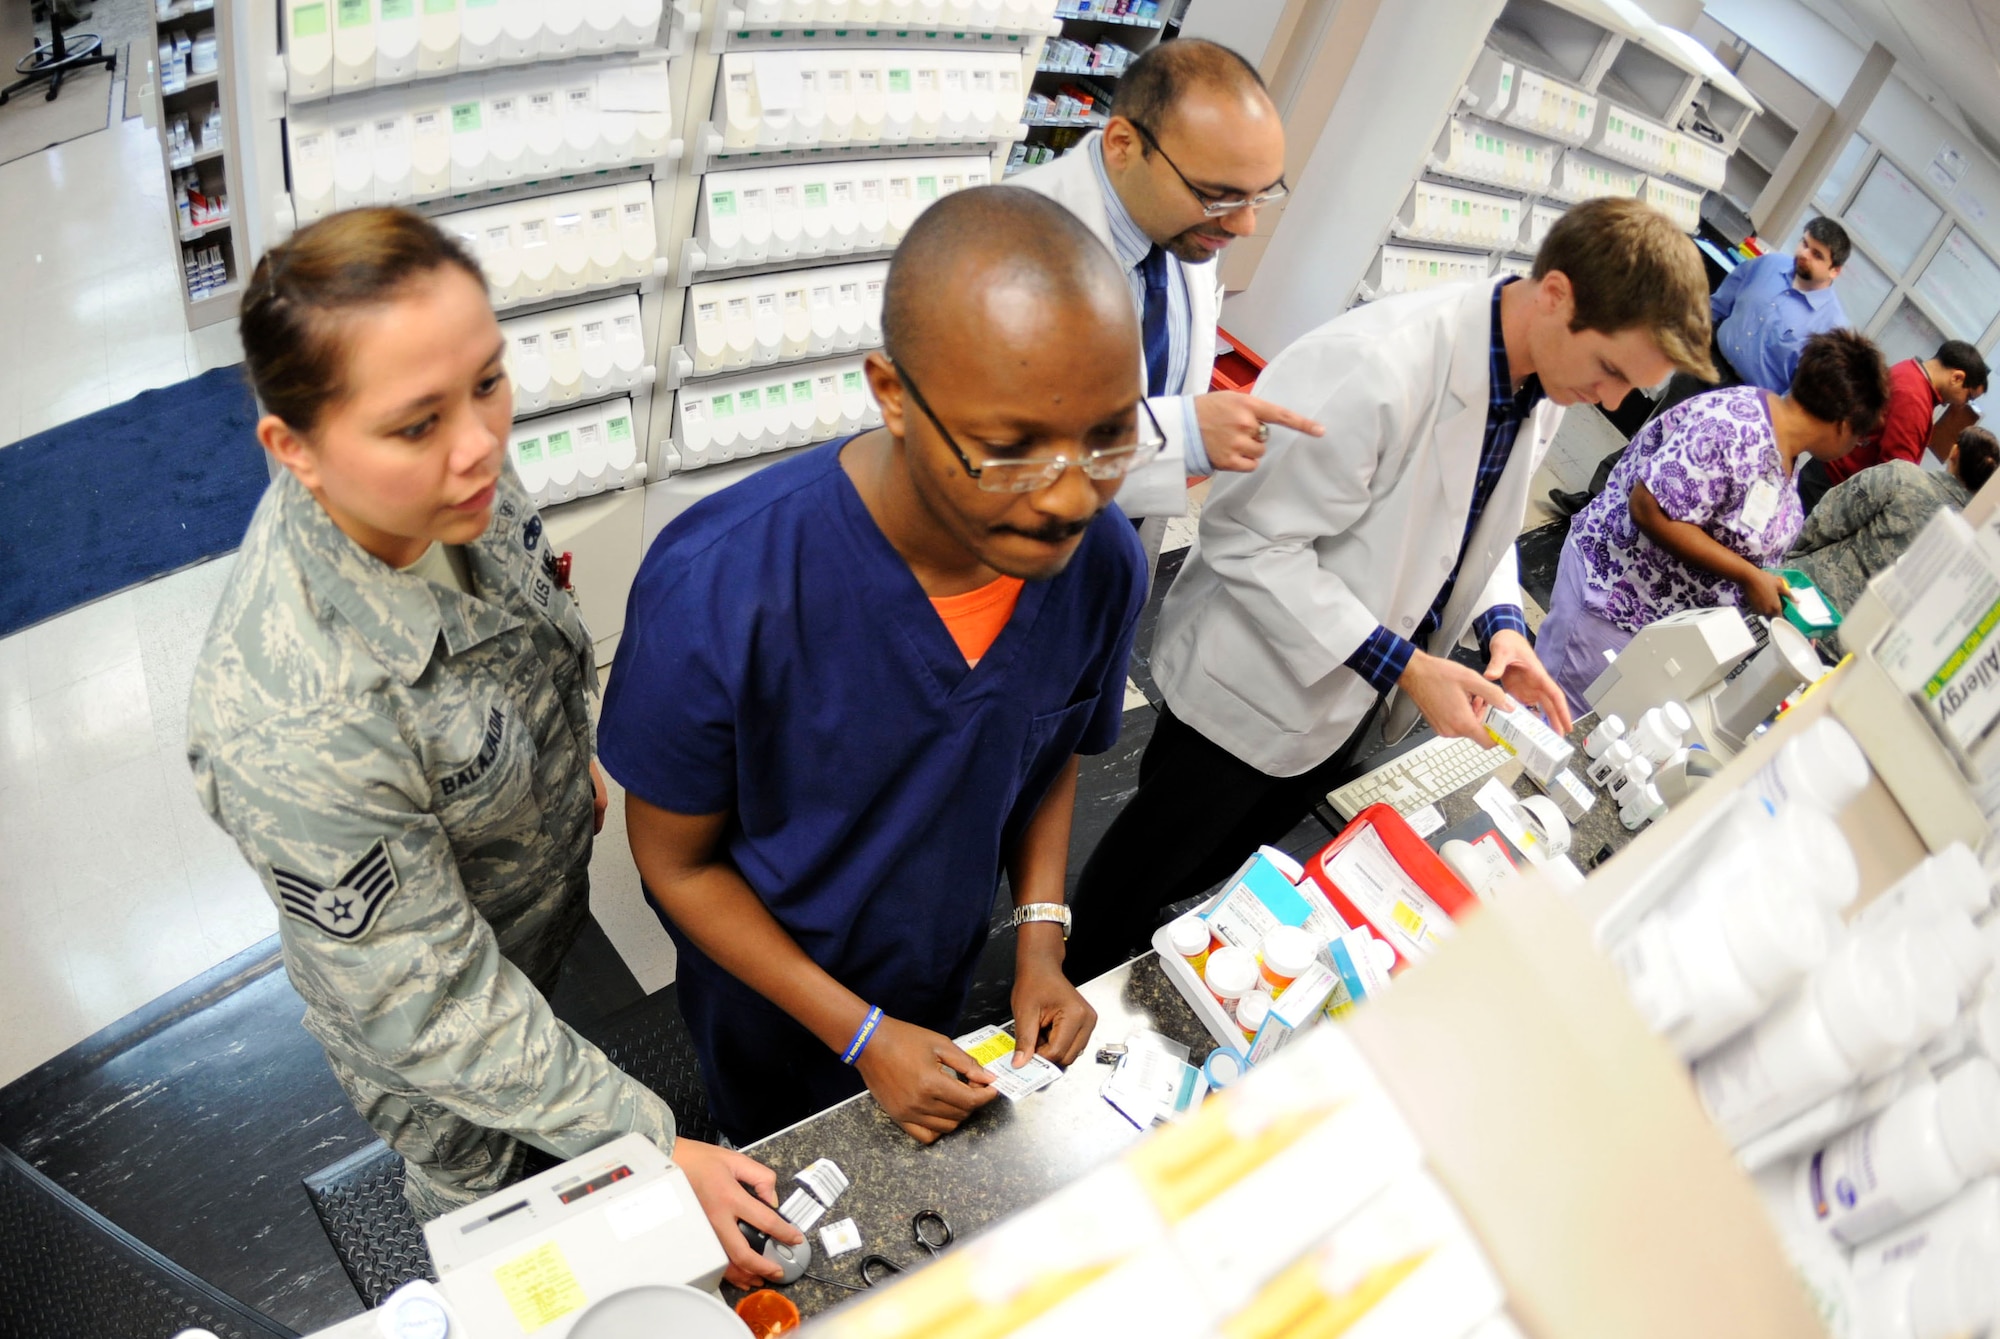 Dyess pharmacists and pharmacy technicians work together to fill orders and help customers, Oct. 21, 2013. Pharmacists and pharmacy technicians follow a nine-step checklist to ensure accuracy, which verifies patient and medical information. (U.S. Air Force photo by Airman 1st Class Kedesha Pennant/Released)

